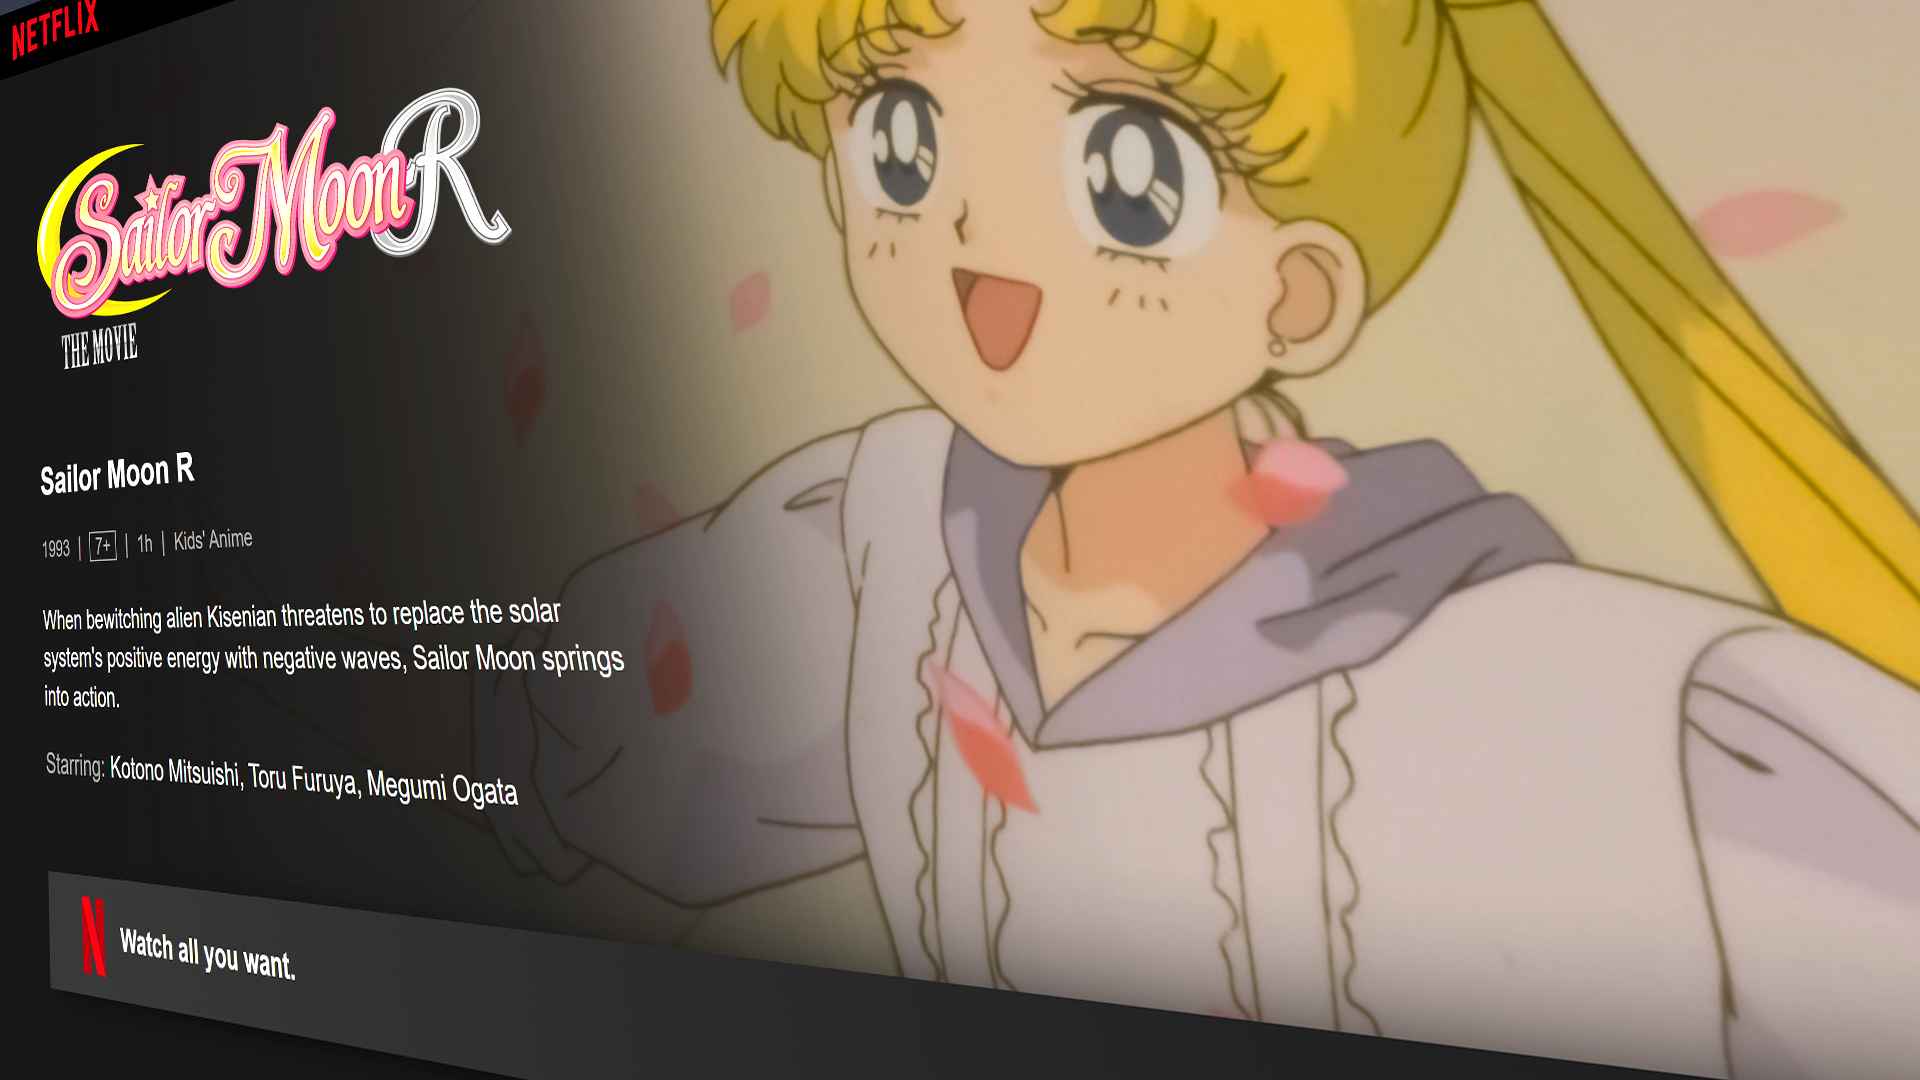 Screenshot of Netflix Japan with Sailor Moon R The Movie The Promise of the Rose featured.